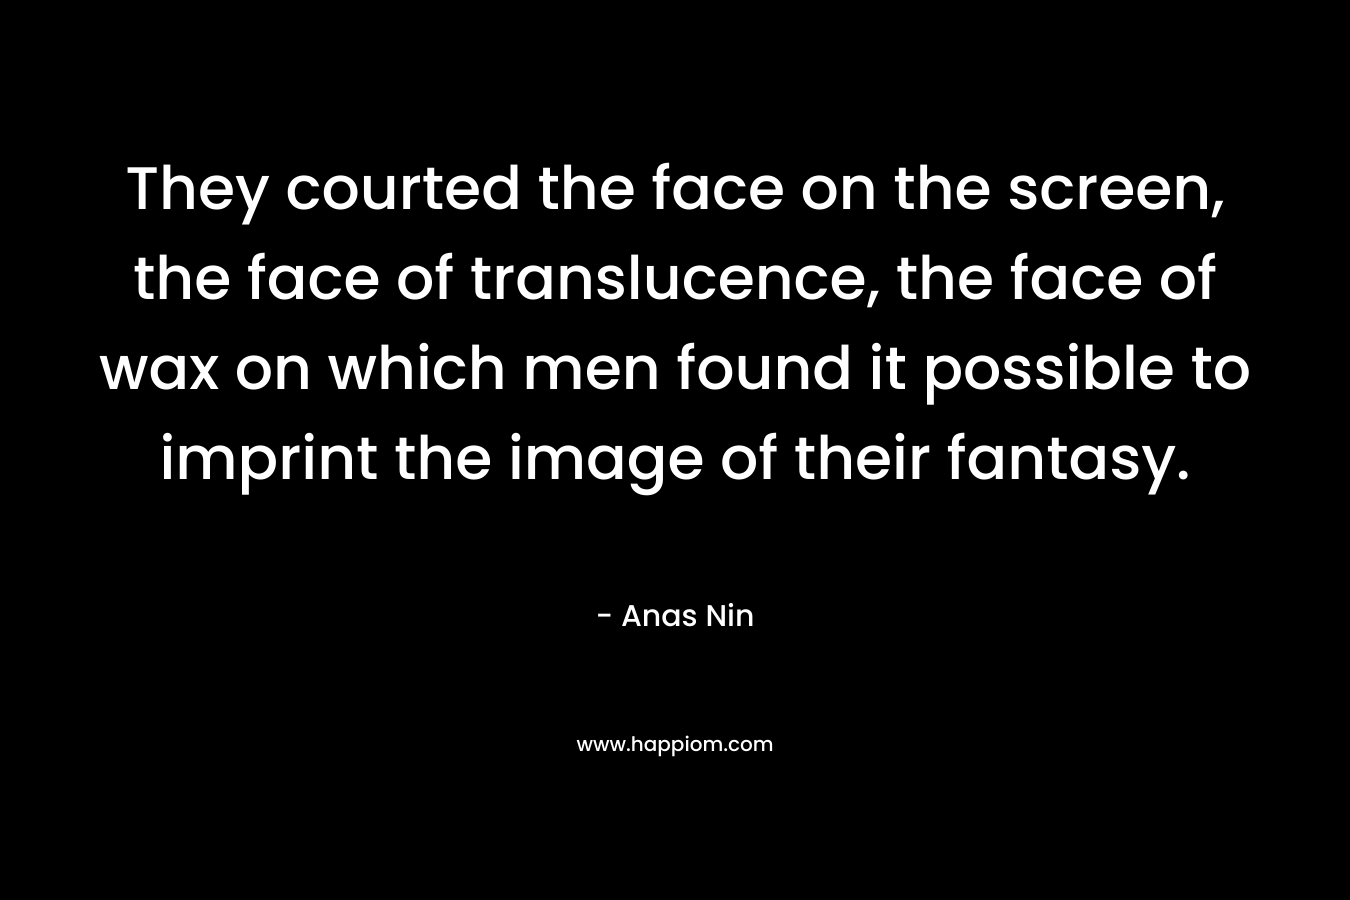 They courted the face on the screen, the face of translucence, the face of wax on which men found it possible to imprint the image of their fantasy. – Anas Nin